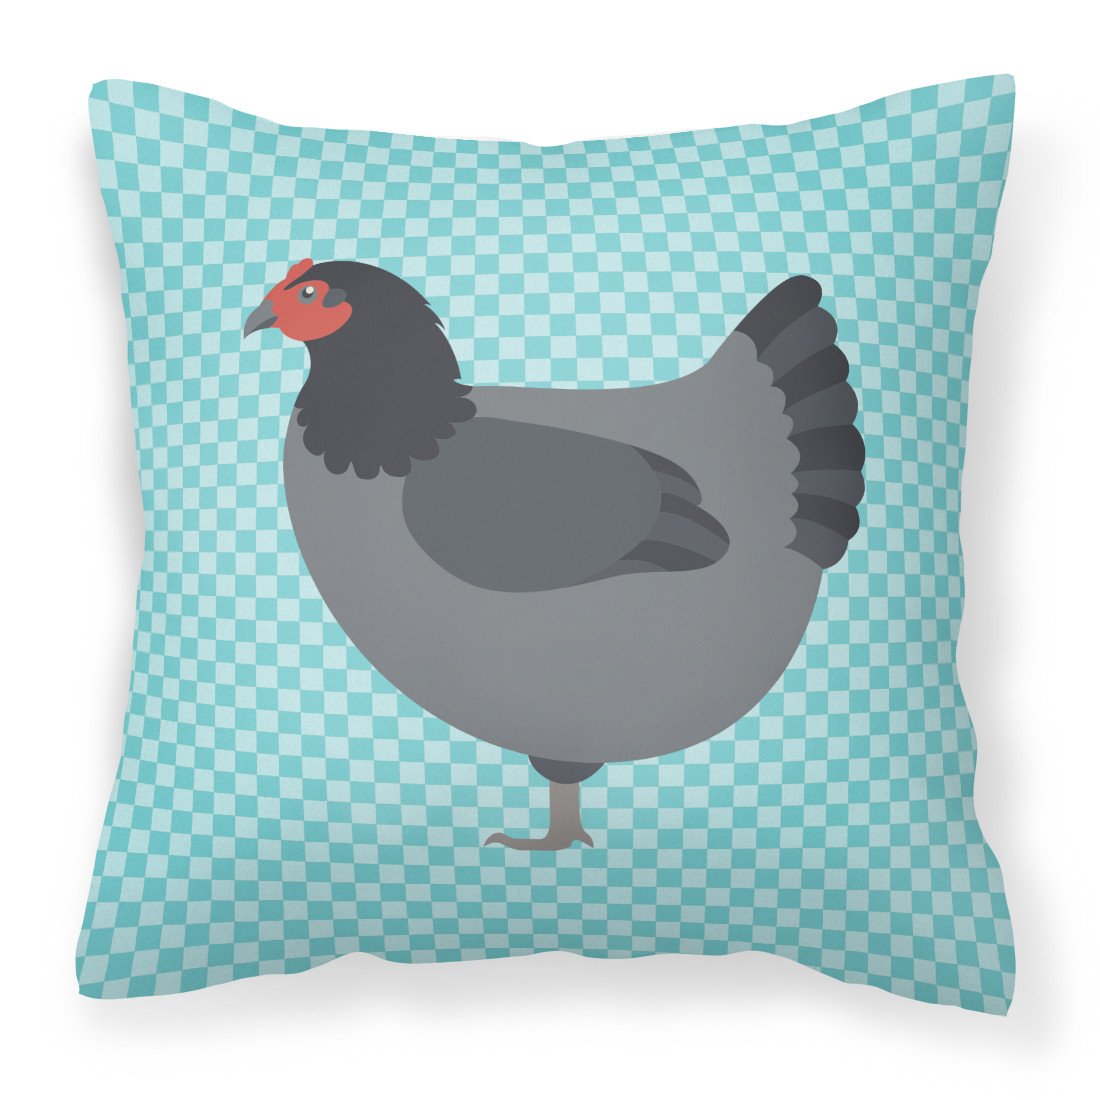 Jersey Giant Chicken Blue Check Fabric Decorative Pillow BB8009PW1818 by Caroline's Treasures